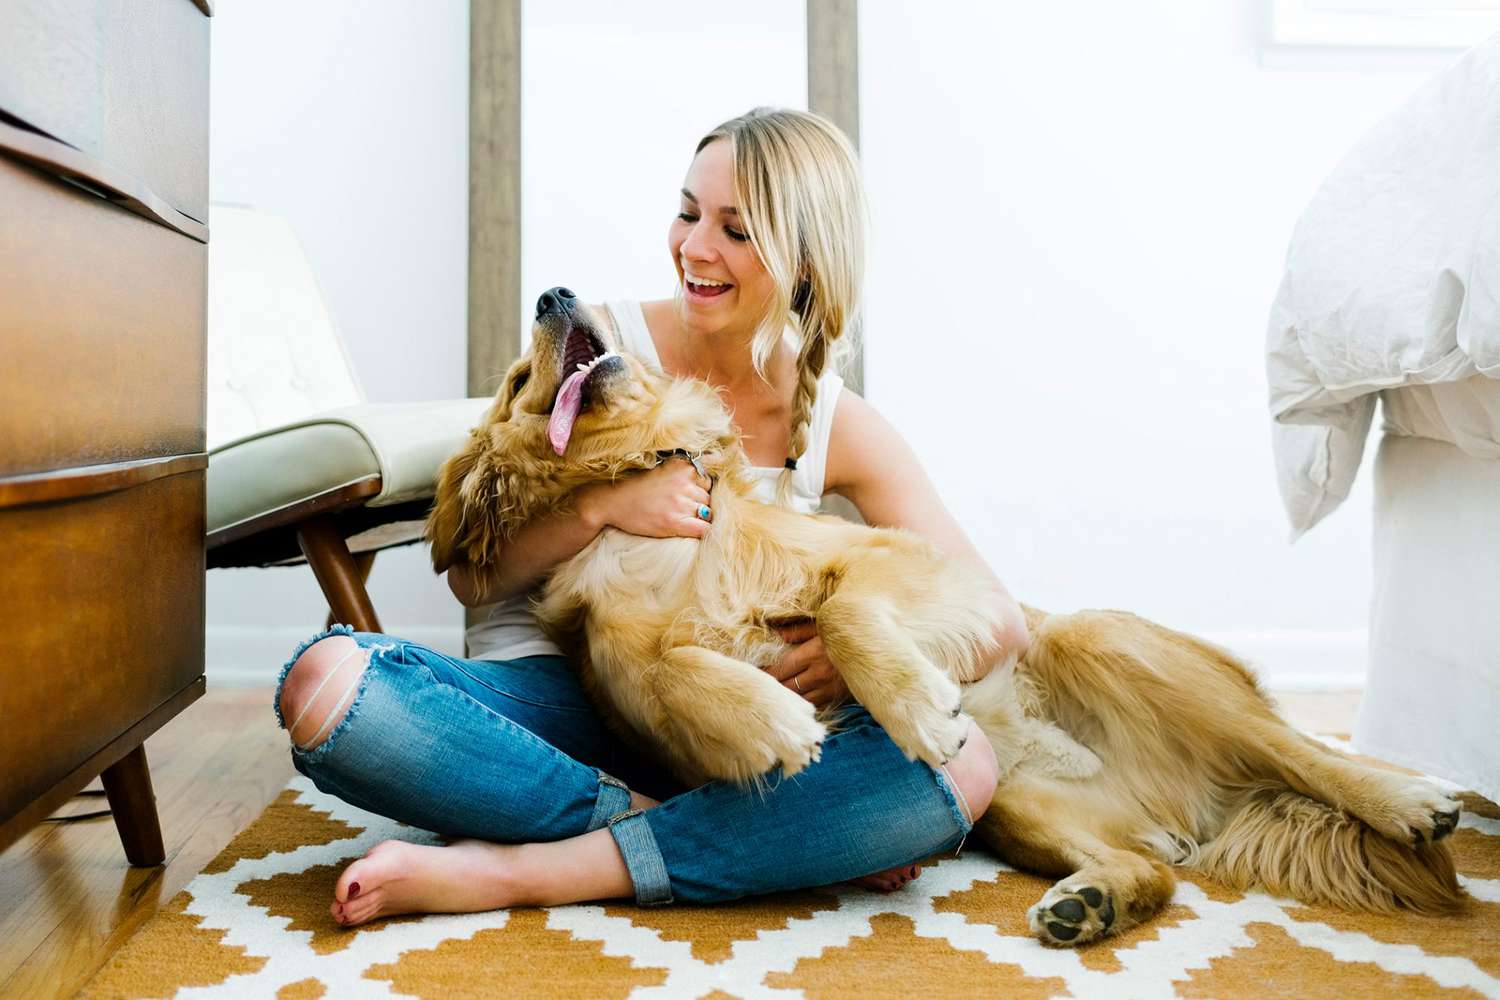 woman cuddles on the floor with a golden retriever, one of the most affectionate dog breeds